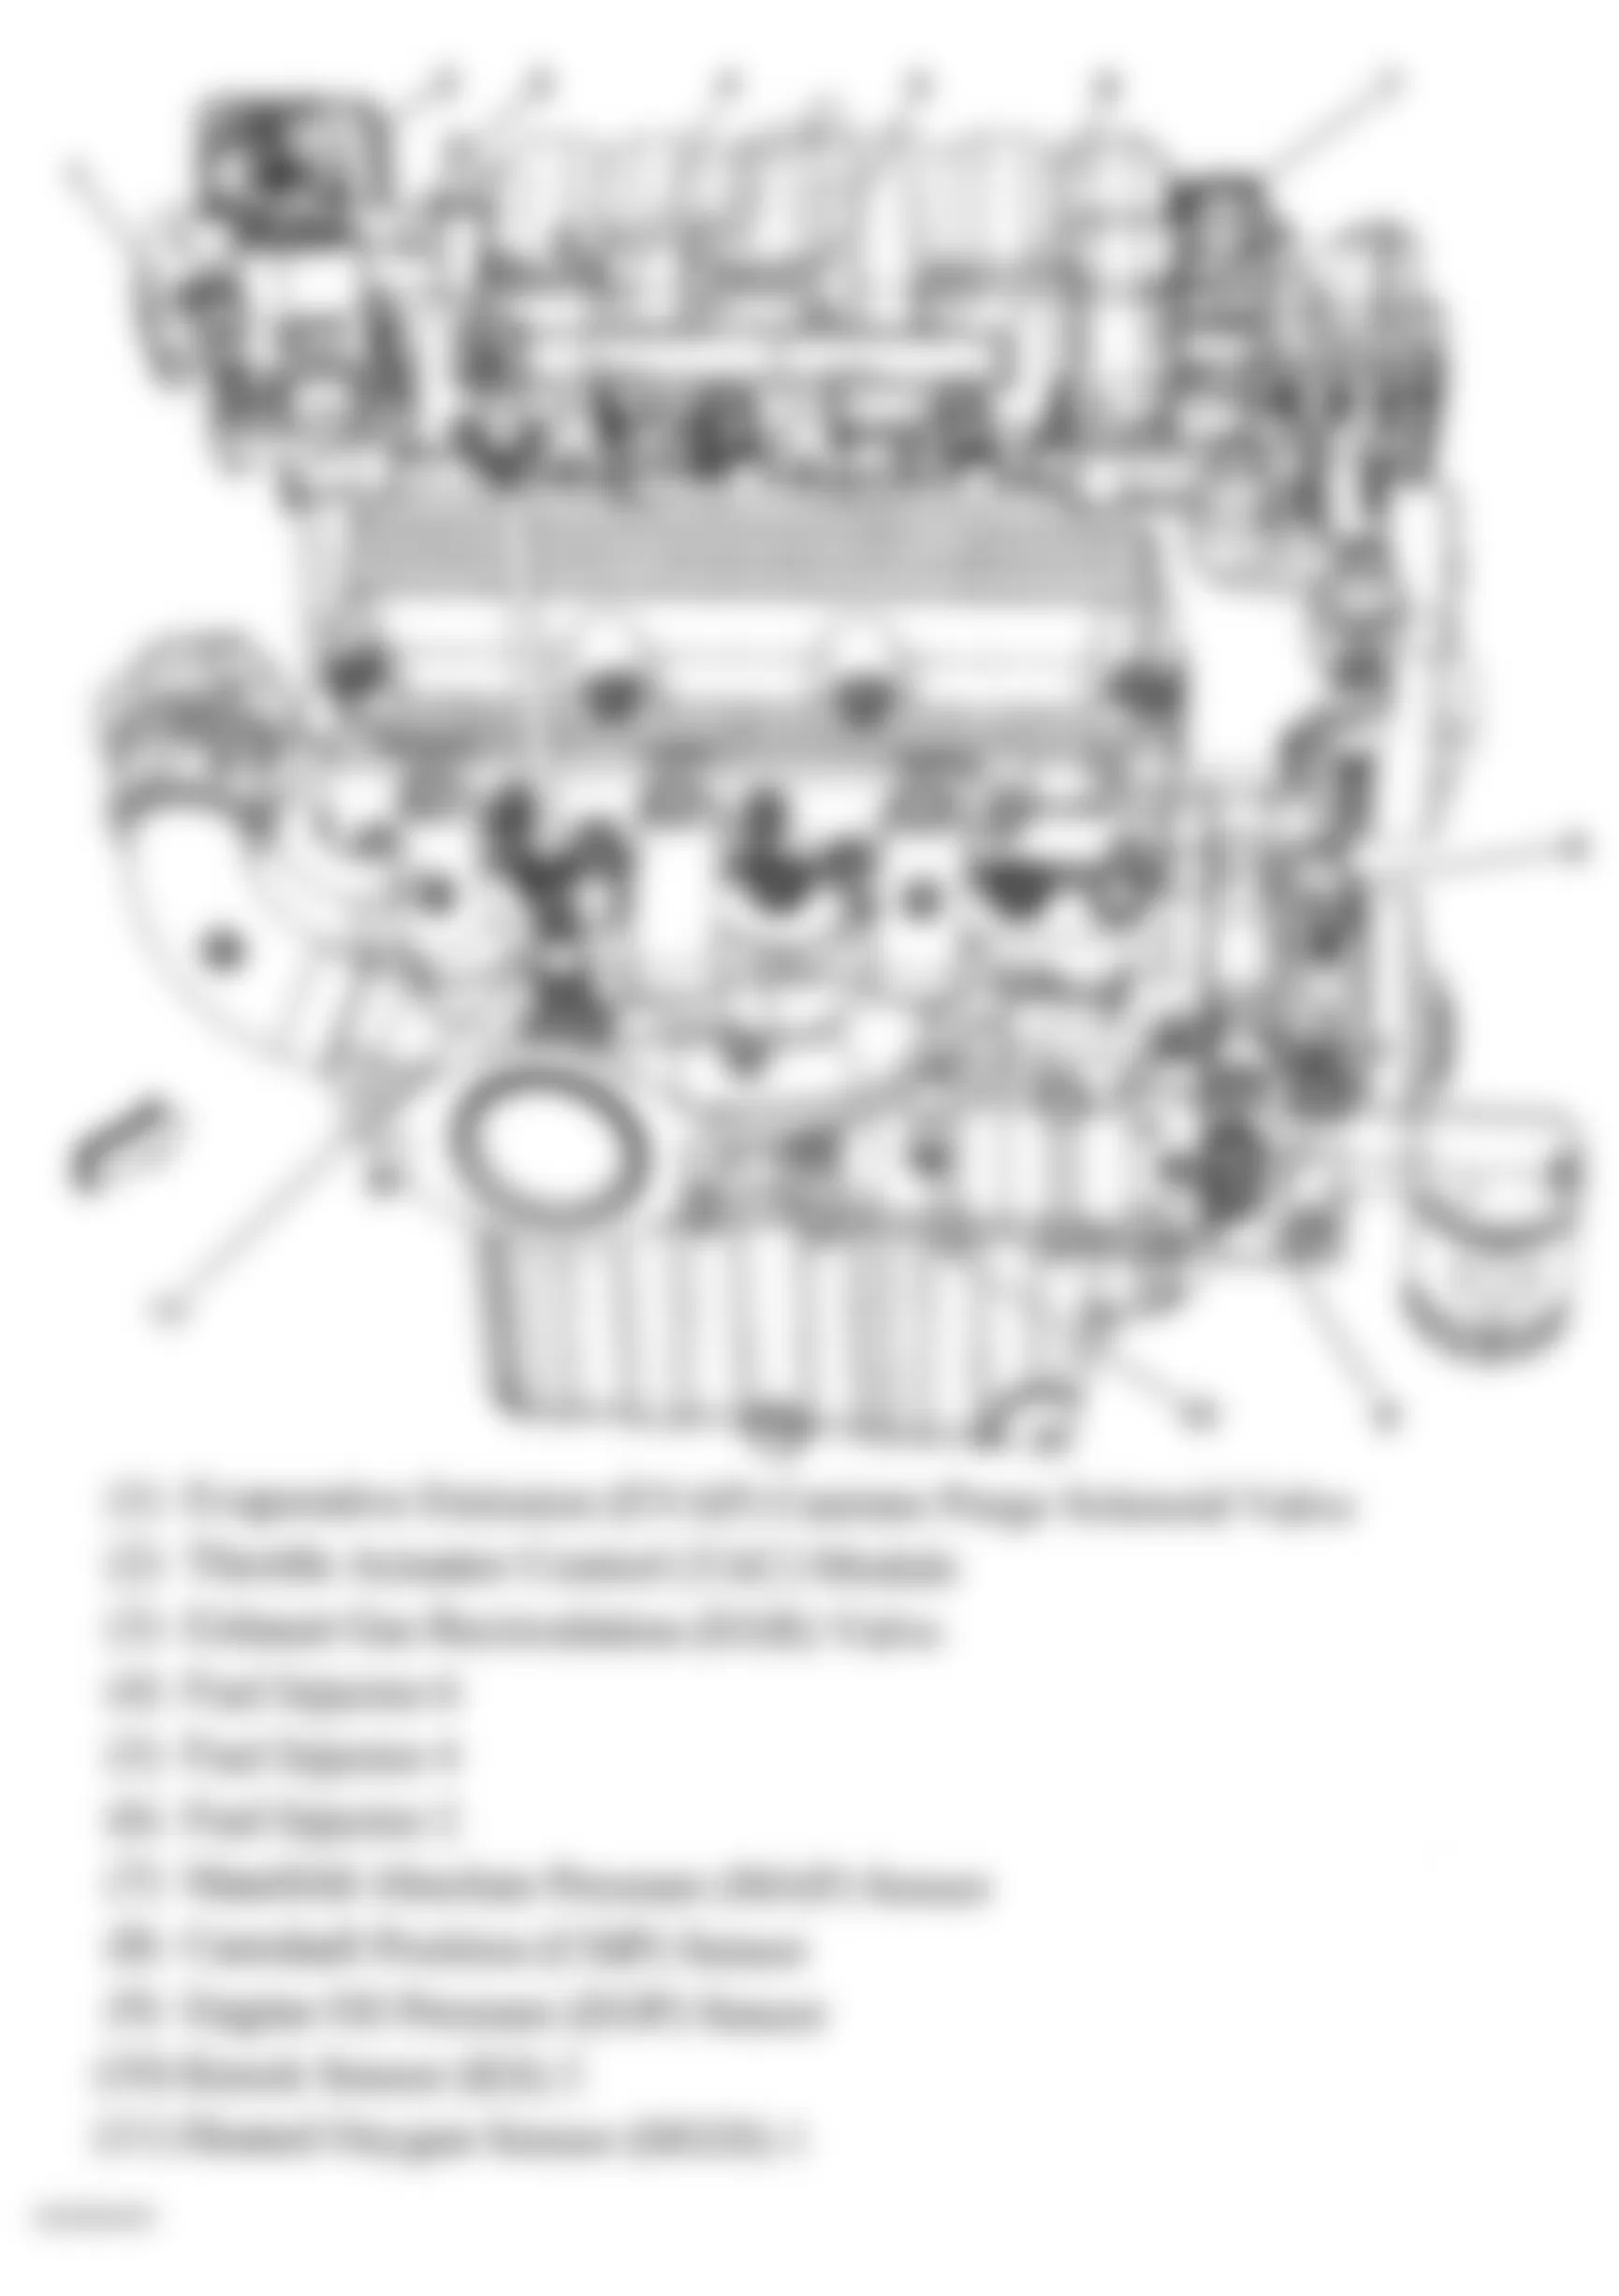 Buick LaCrosse CXS 2008 - Component Locations -  Right Side Of Engine (3.8L)